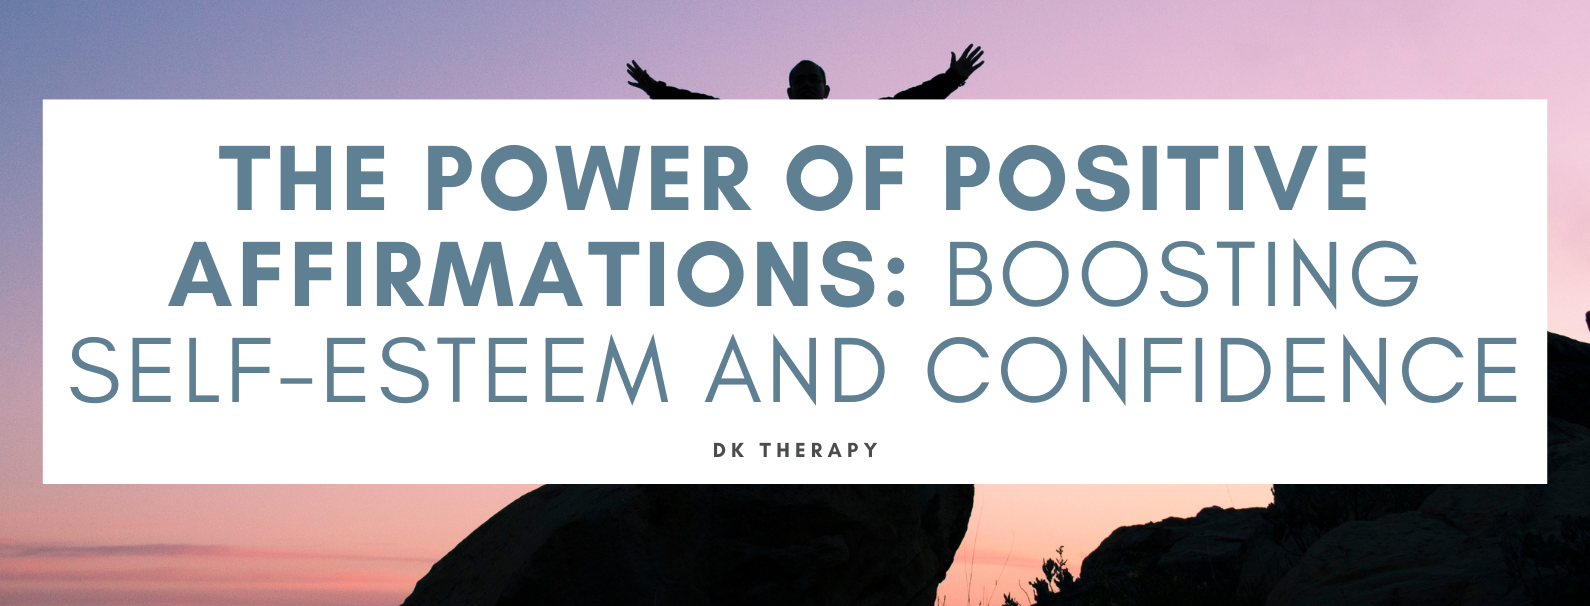 The Power of Positive Affirmations Boosting Self-Esteem and Confidence